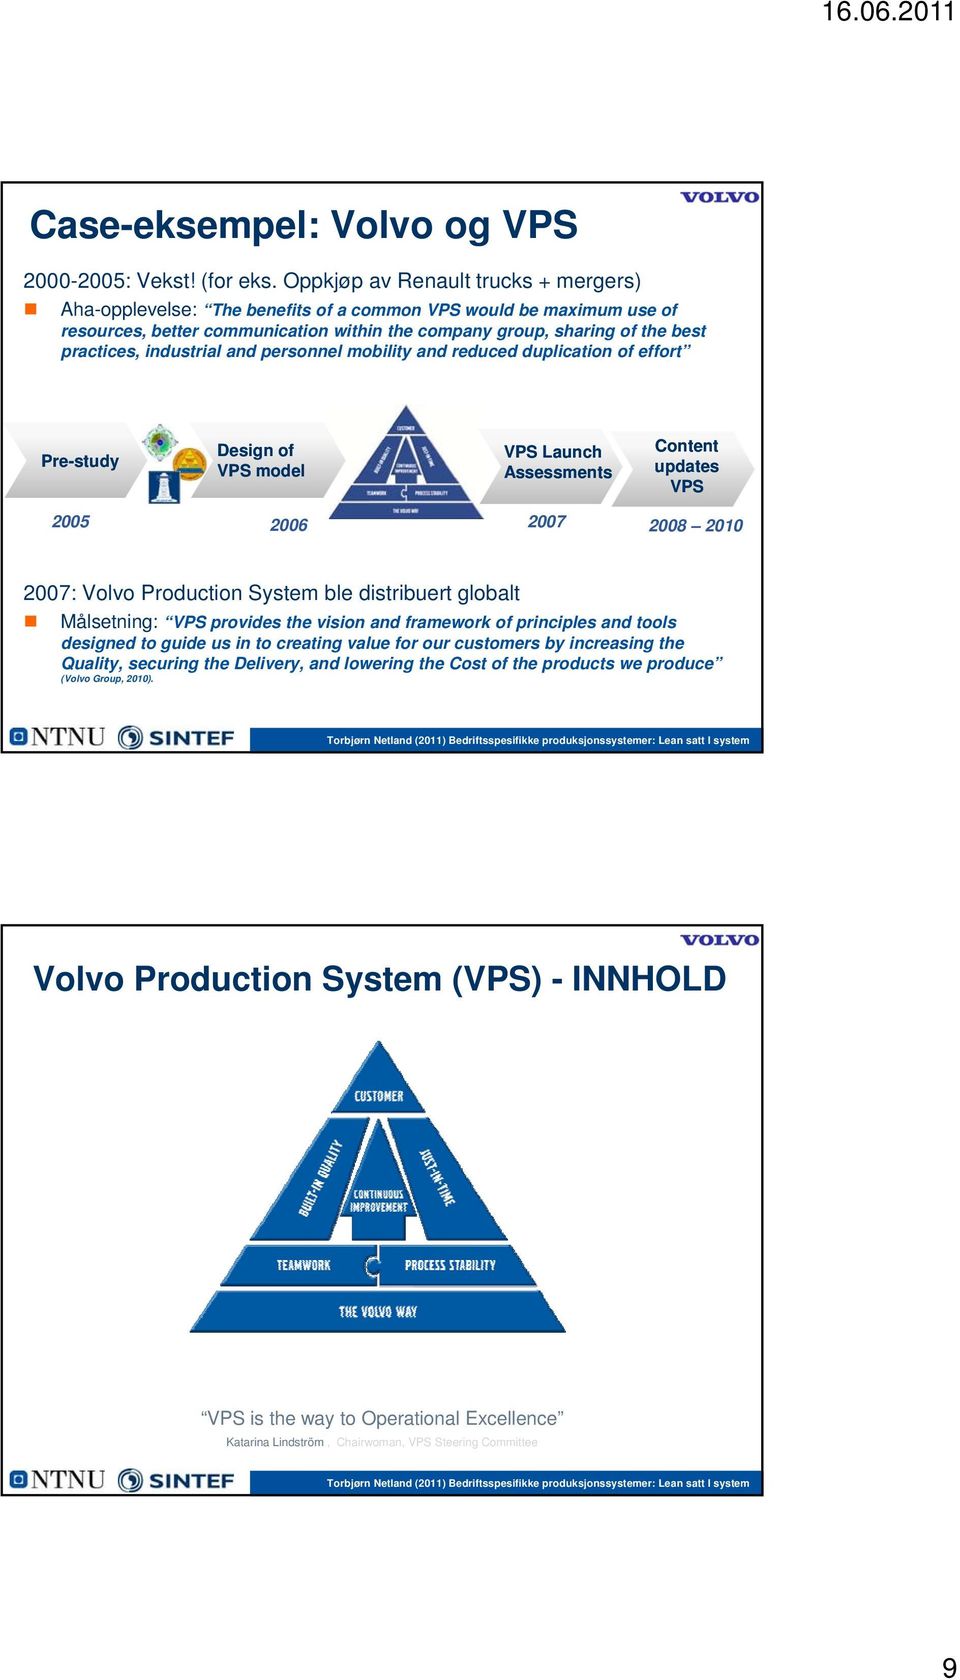 industrial and personnel mobility and reduced duplication of effort Pre-study Design of VPS model VPS Launch Assessments Content updates VPS 2005 2006 2007 2008 2010 2007: Volvo Production System ble